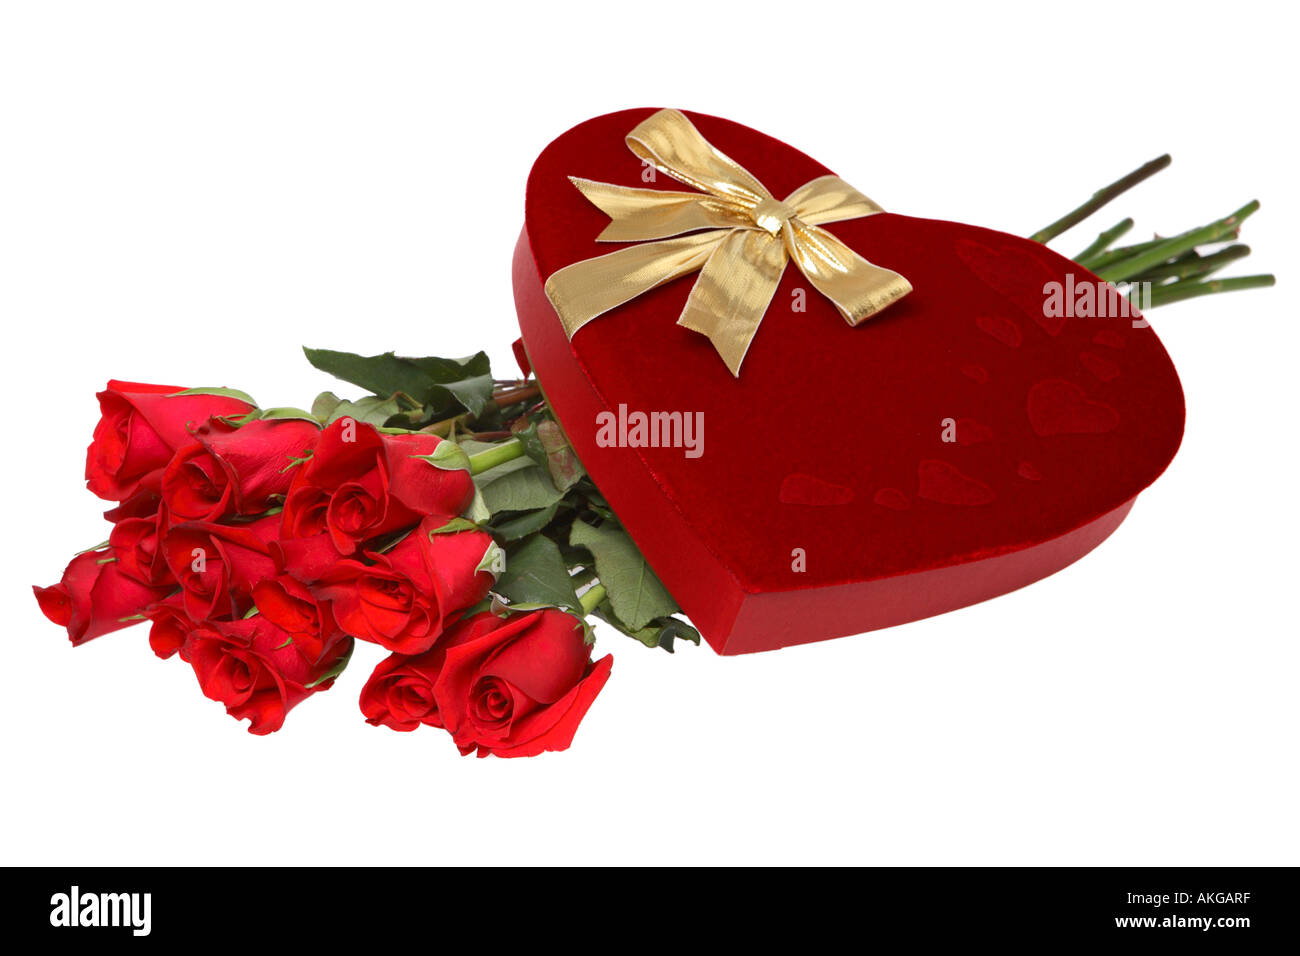 Box of Valentines Day Chocolates and a Dozen Long Stem Roses Stock Photo